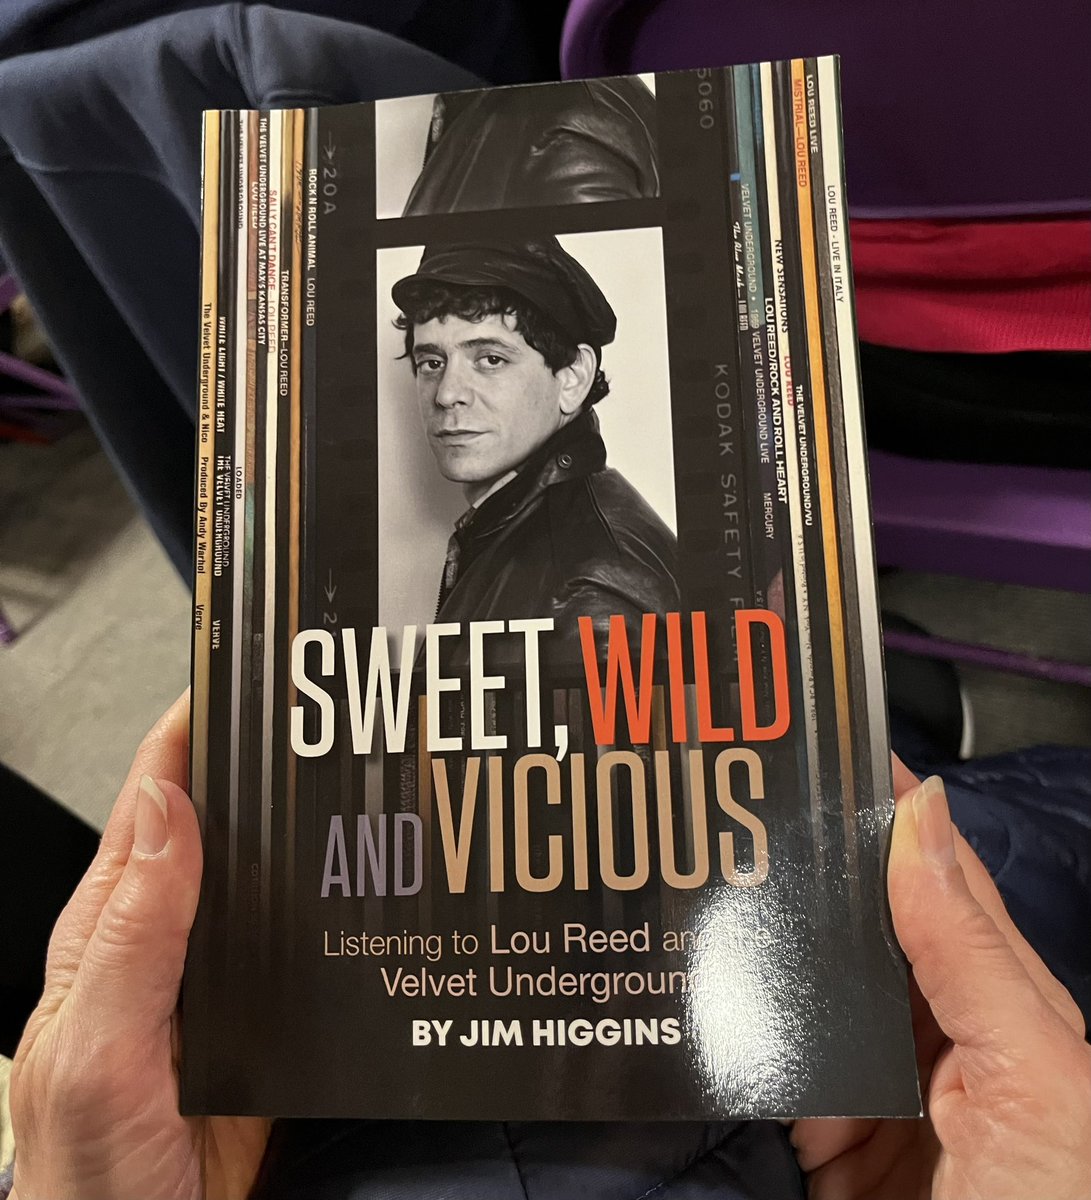 Listening to the excellent @jhiggy read from his new book, SWEET, WILD, AND VICIOUS, a deep dive into Lou Reed and the Velvet Underground. Good stuff at @boswellbooks !